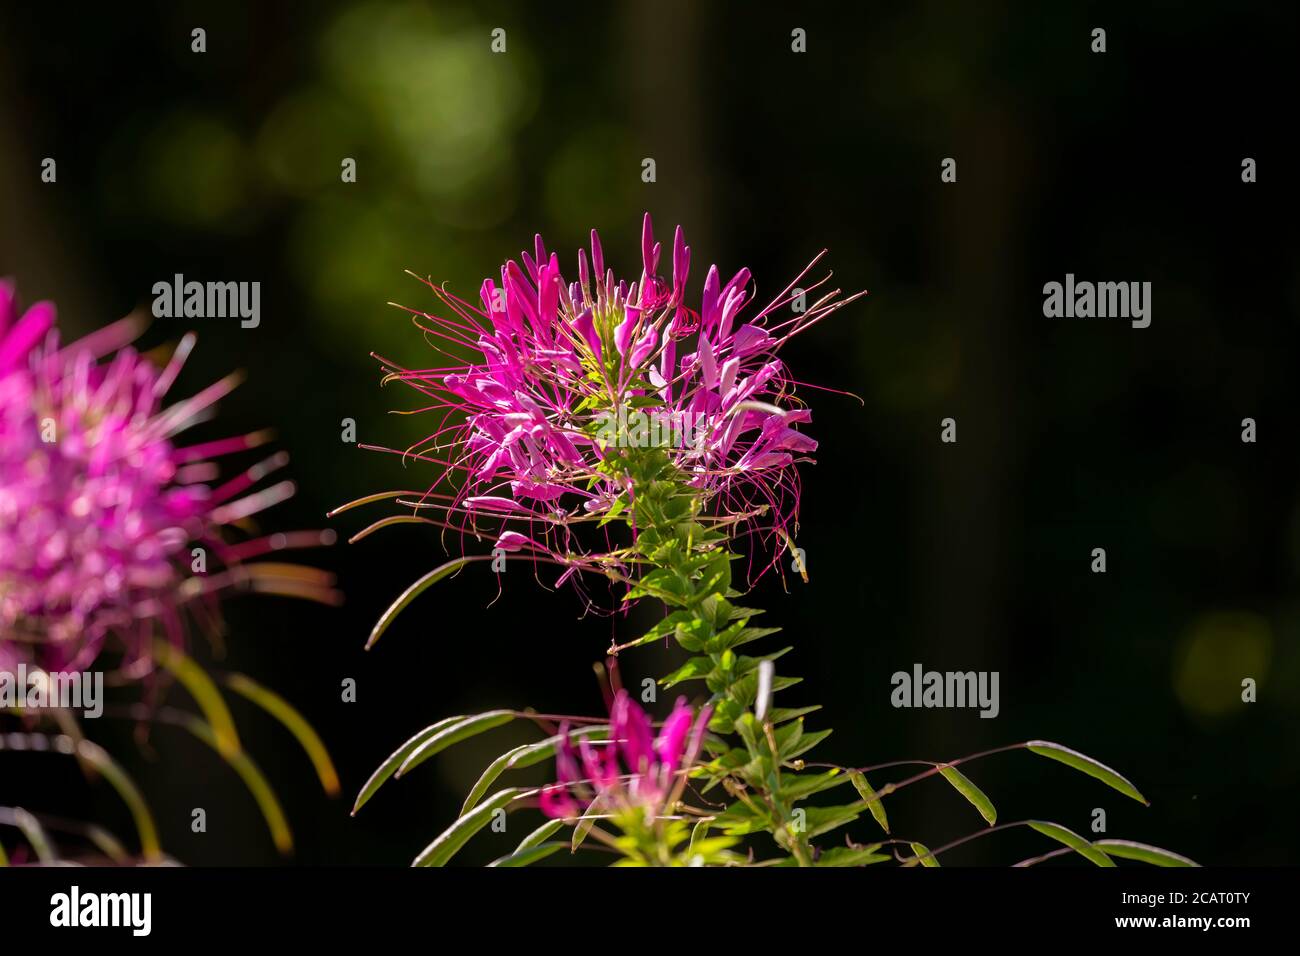 Spiders Flowers in the botanical garden Stock Photo